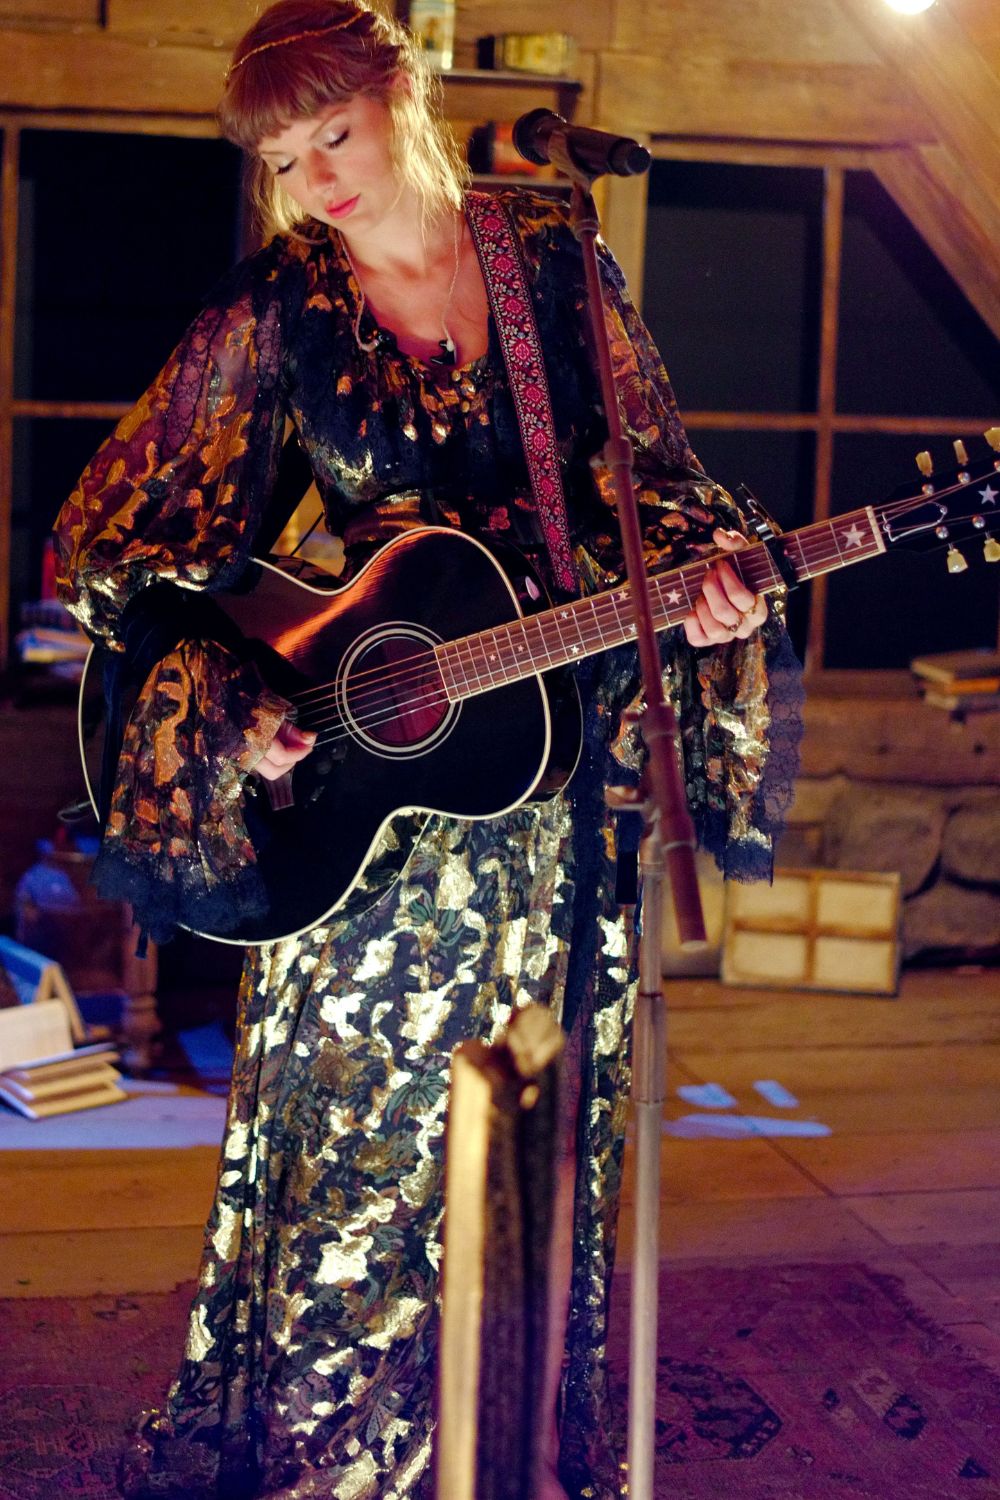 Taylor Swift performing in an intimate space during her Folklore era between 2020-2022.